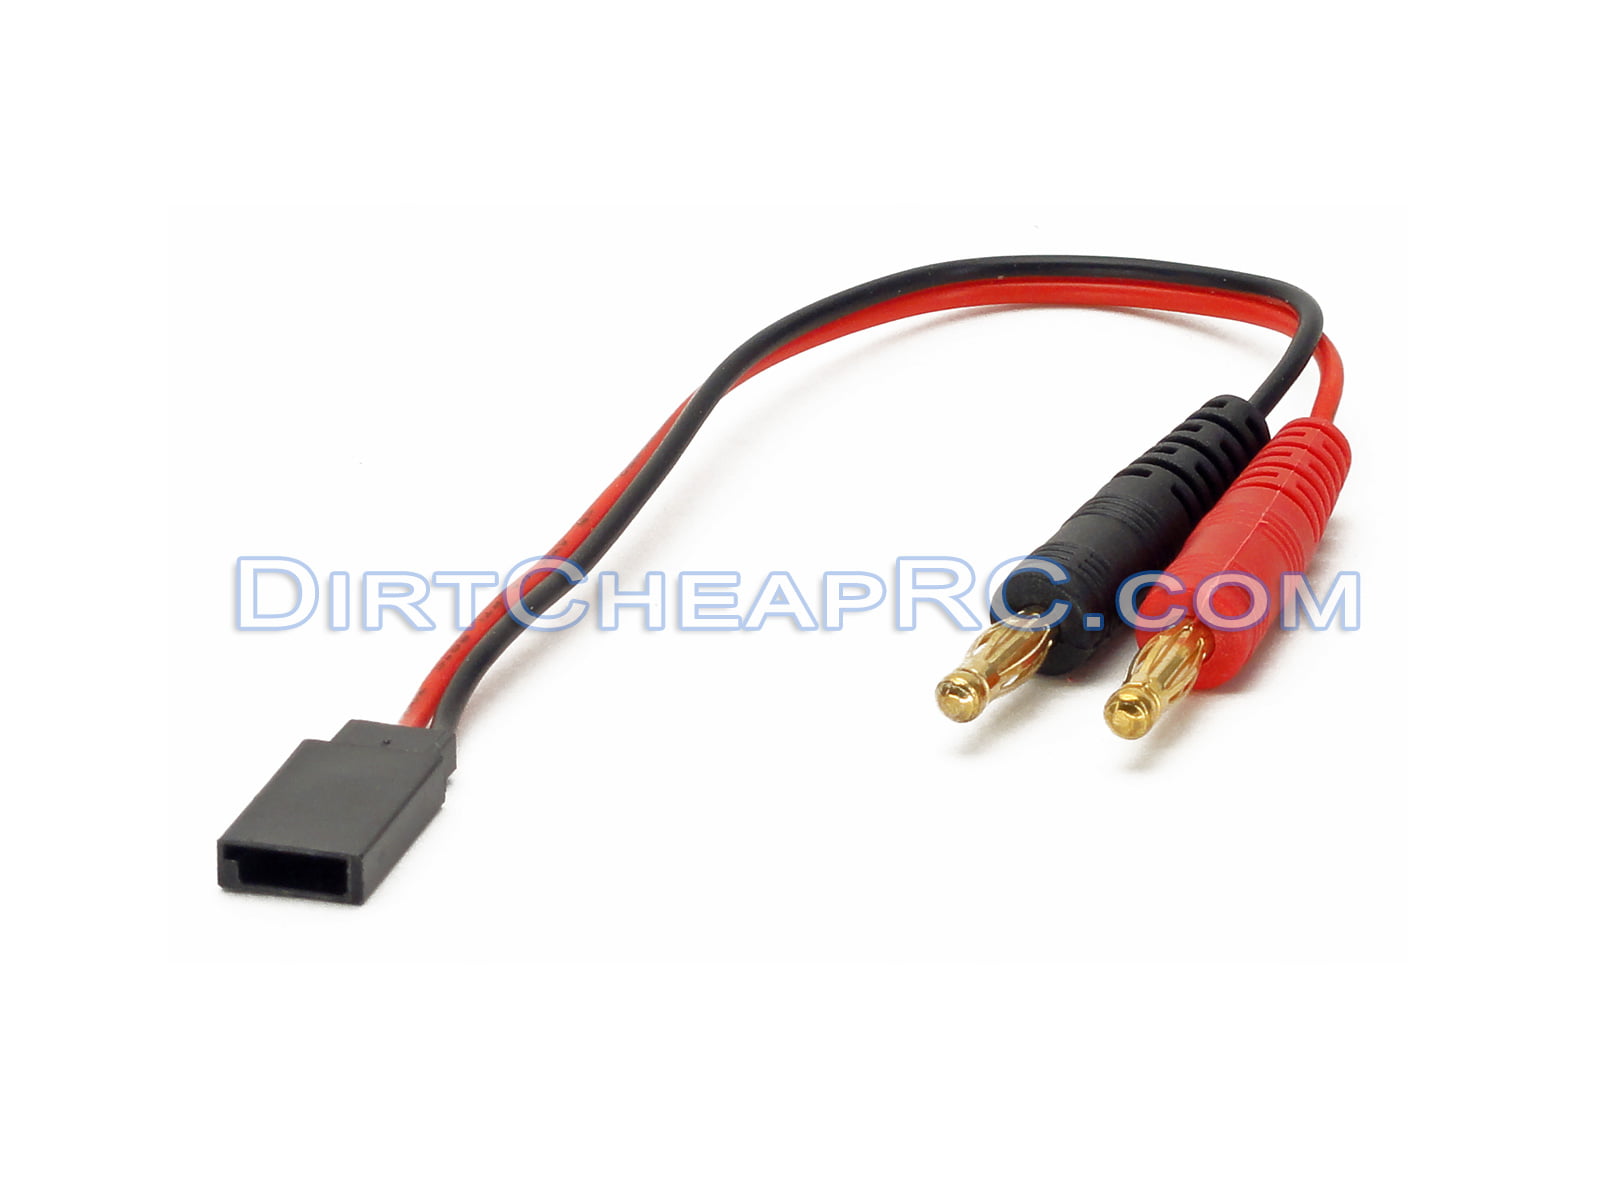 Servo Deans T-Plug Female to Futaba JR Male Charger Cable Adapter Receiver,Rx